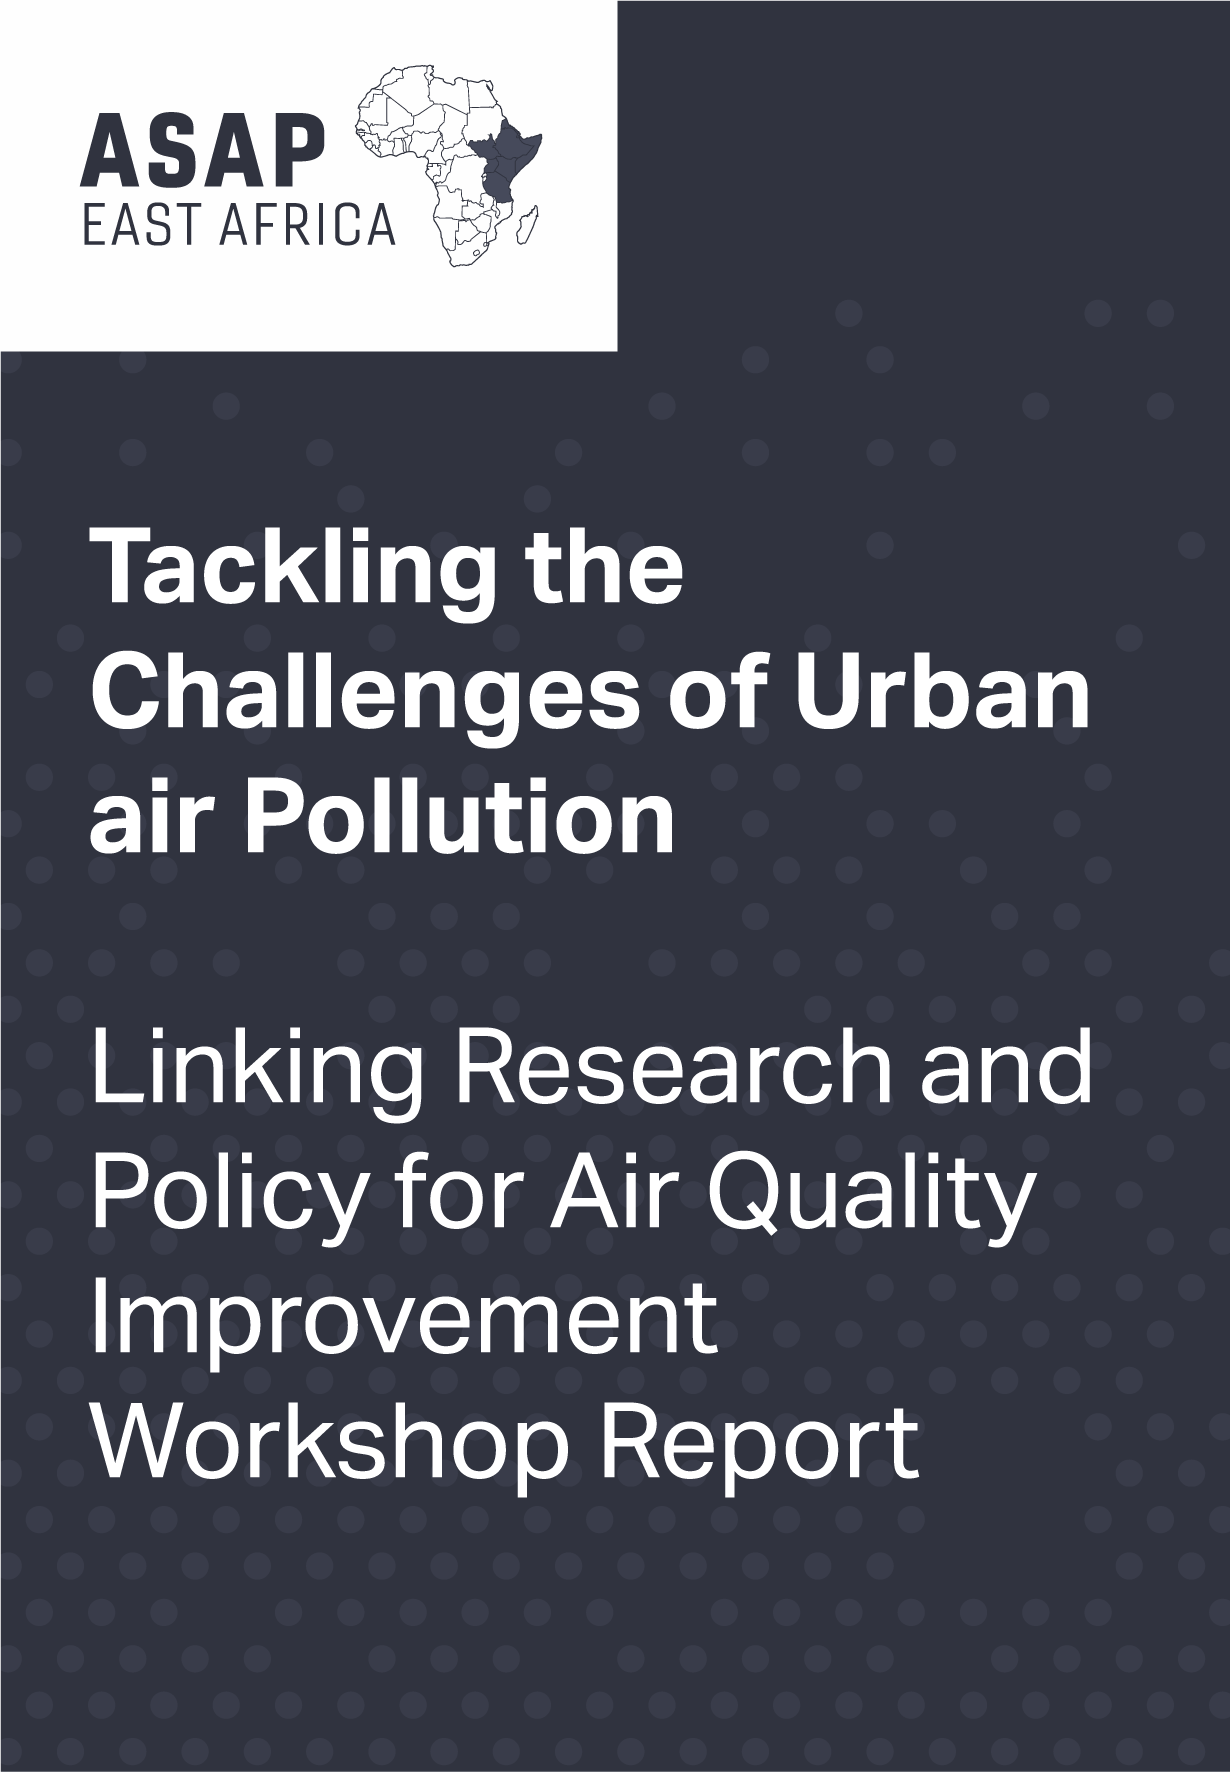 Tackling the Challenges of Urban air Pollution 01-07.png